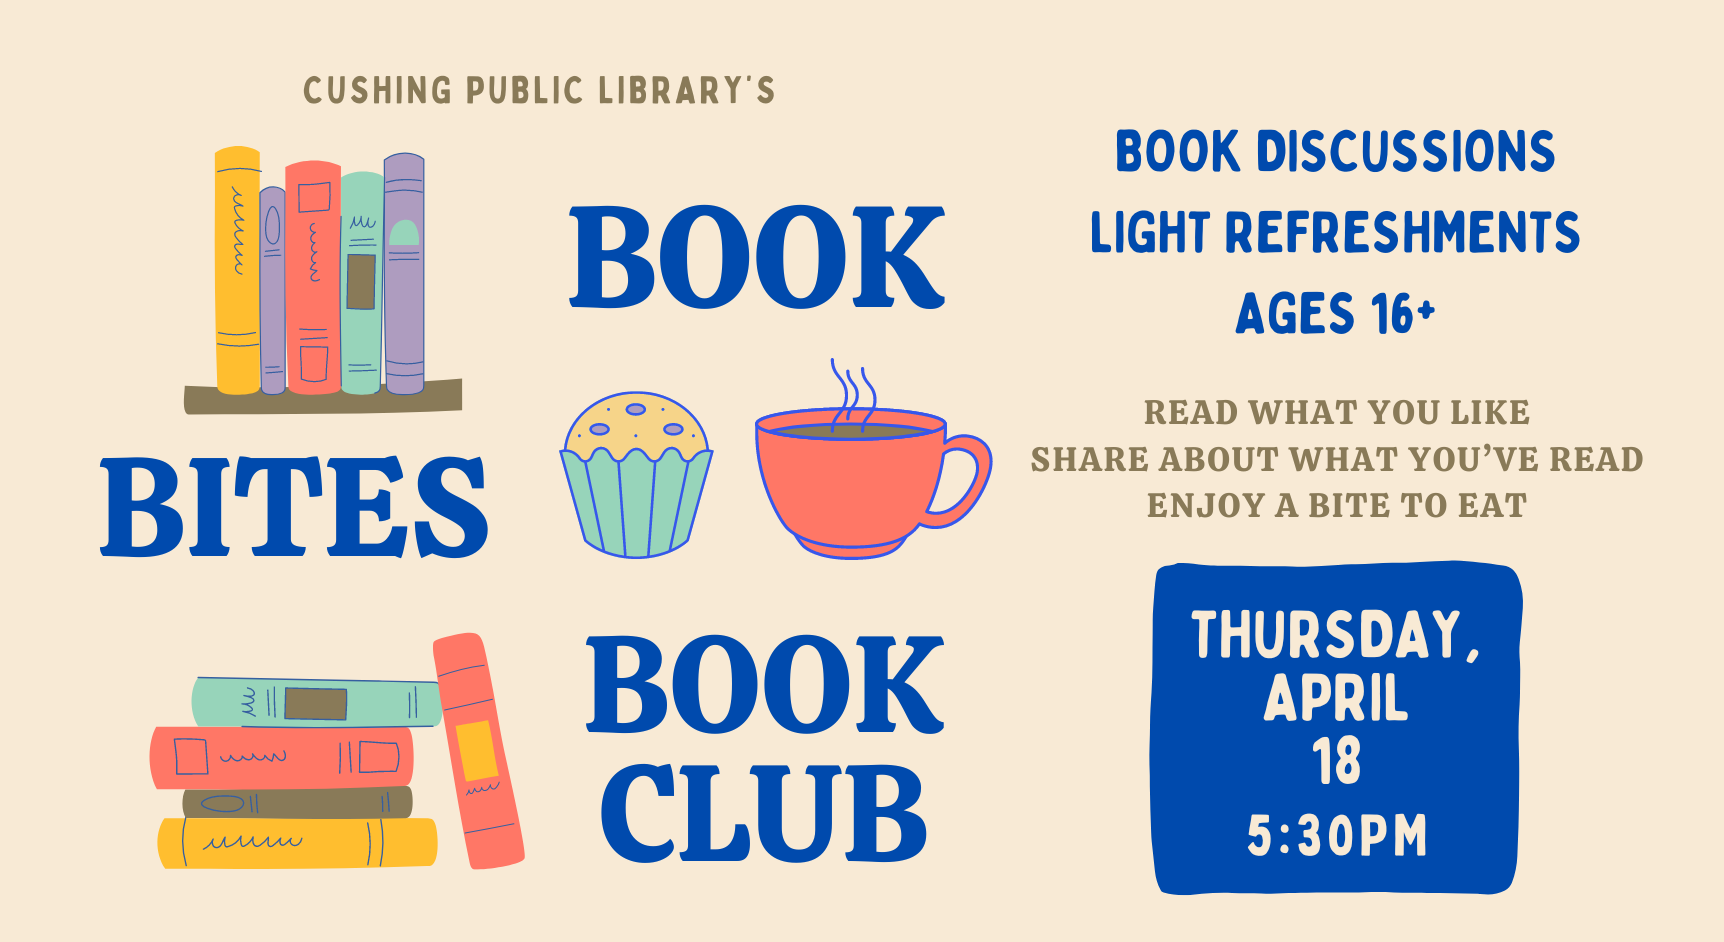 Cushing Public Library's Book Bites Book Club. Read what you like, share about what you’ve read, Enjoy a Bite to eat. Book Discussions Light refreshments Ages 16+. Thursday, April 18 at 5:30pm.